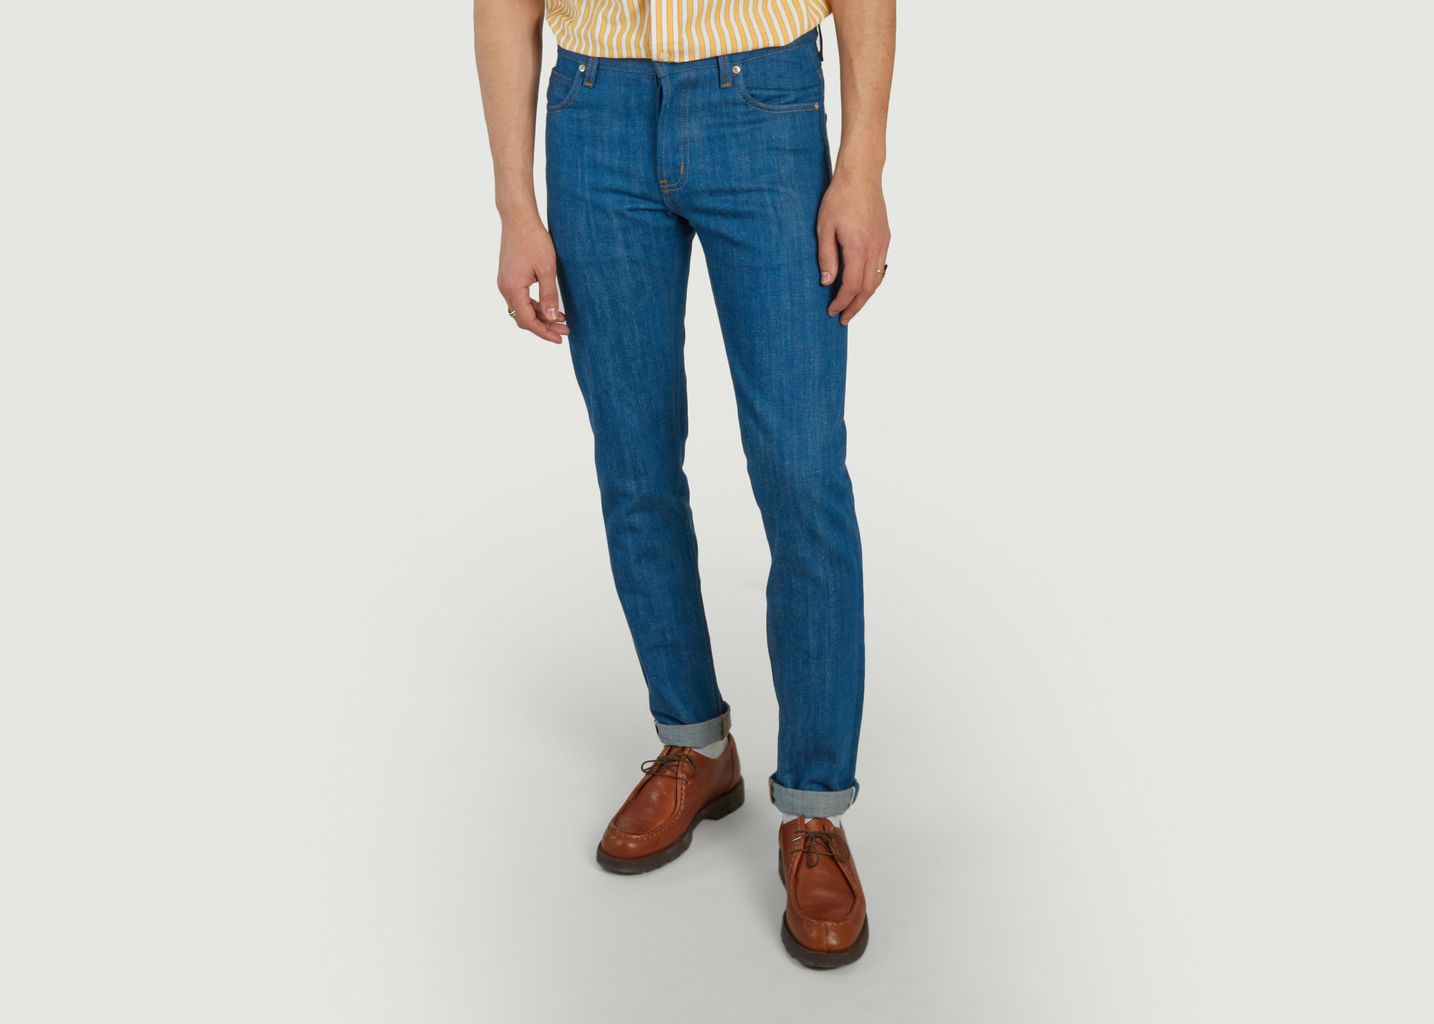 Super Guy Oceans Edge Selvedge Jeans - Naked and Famous